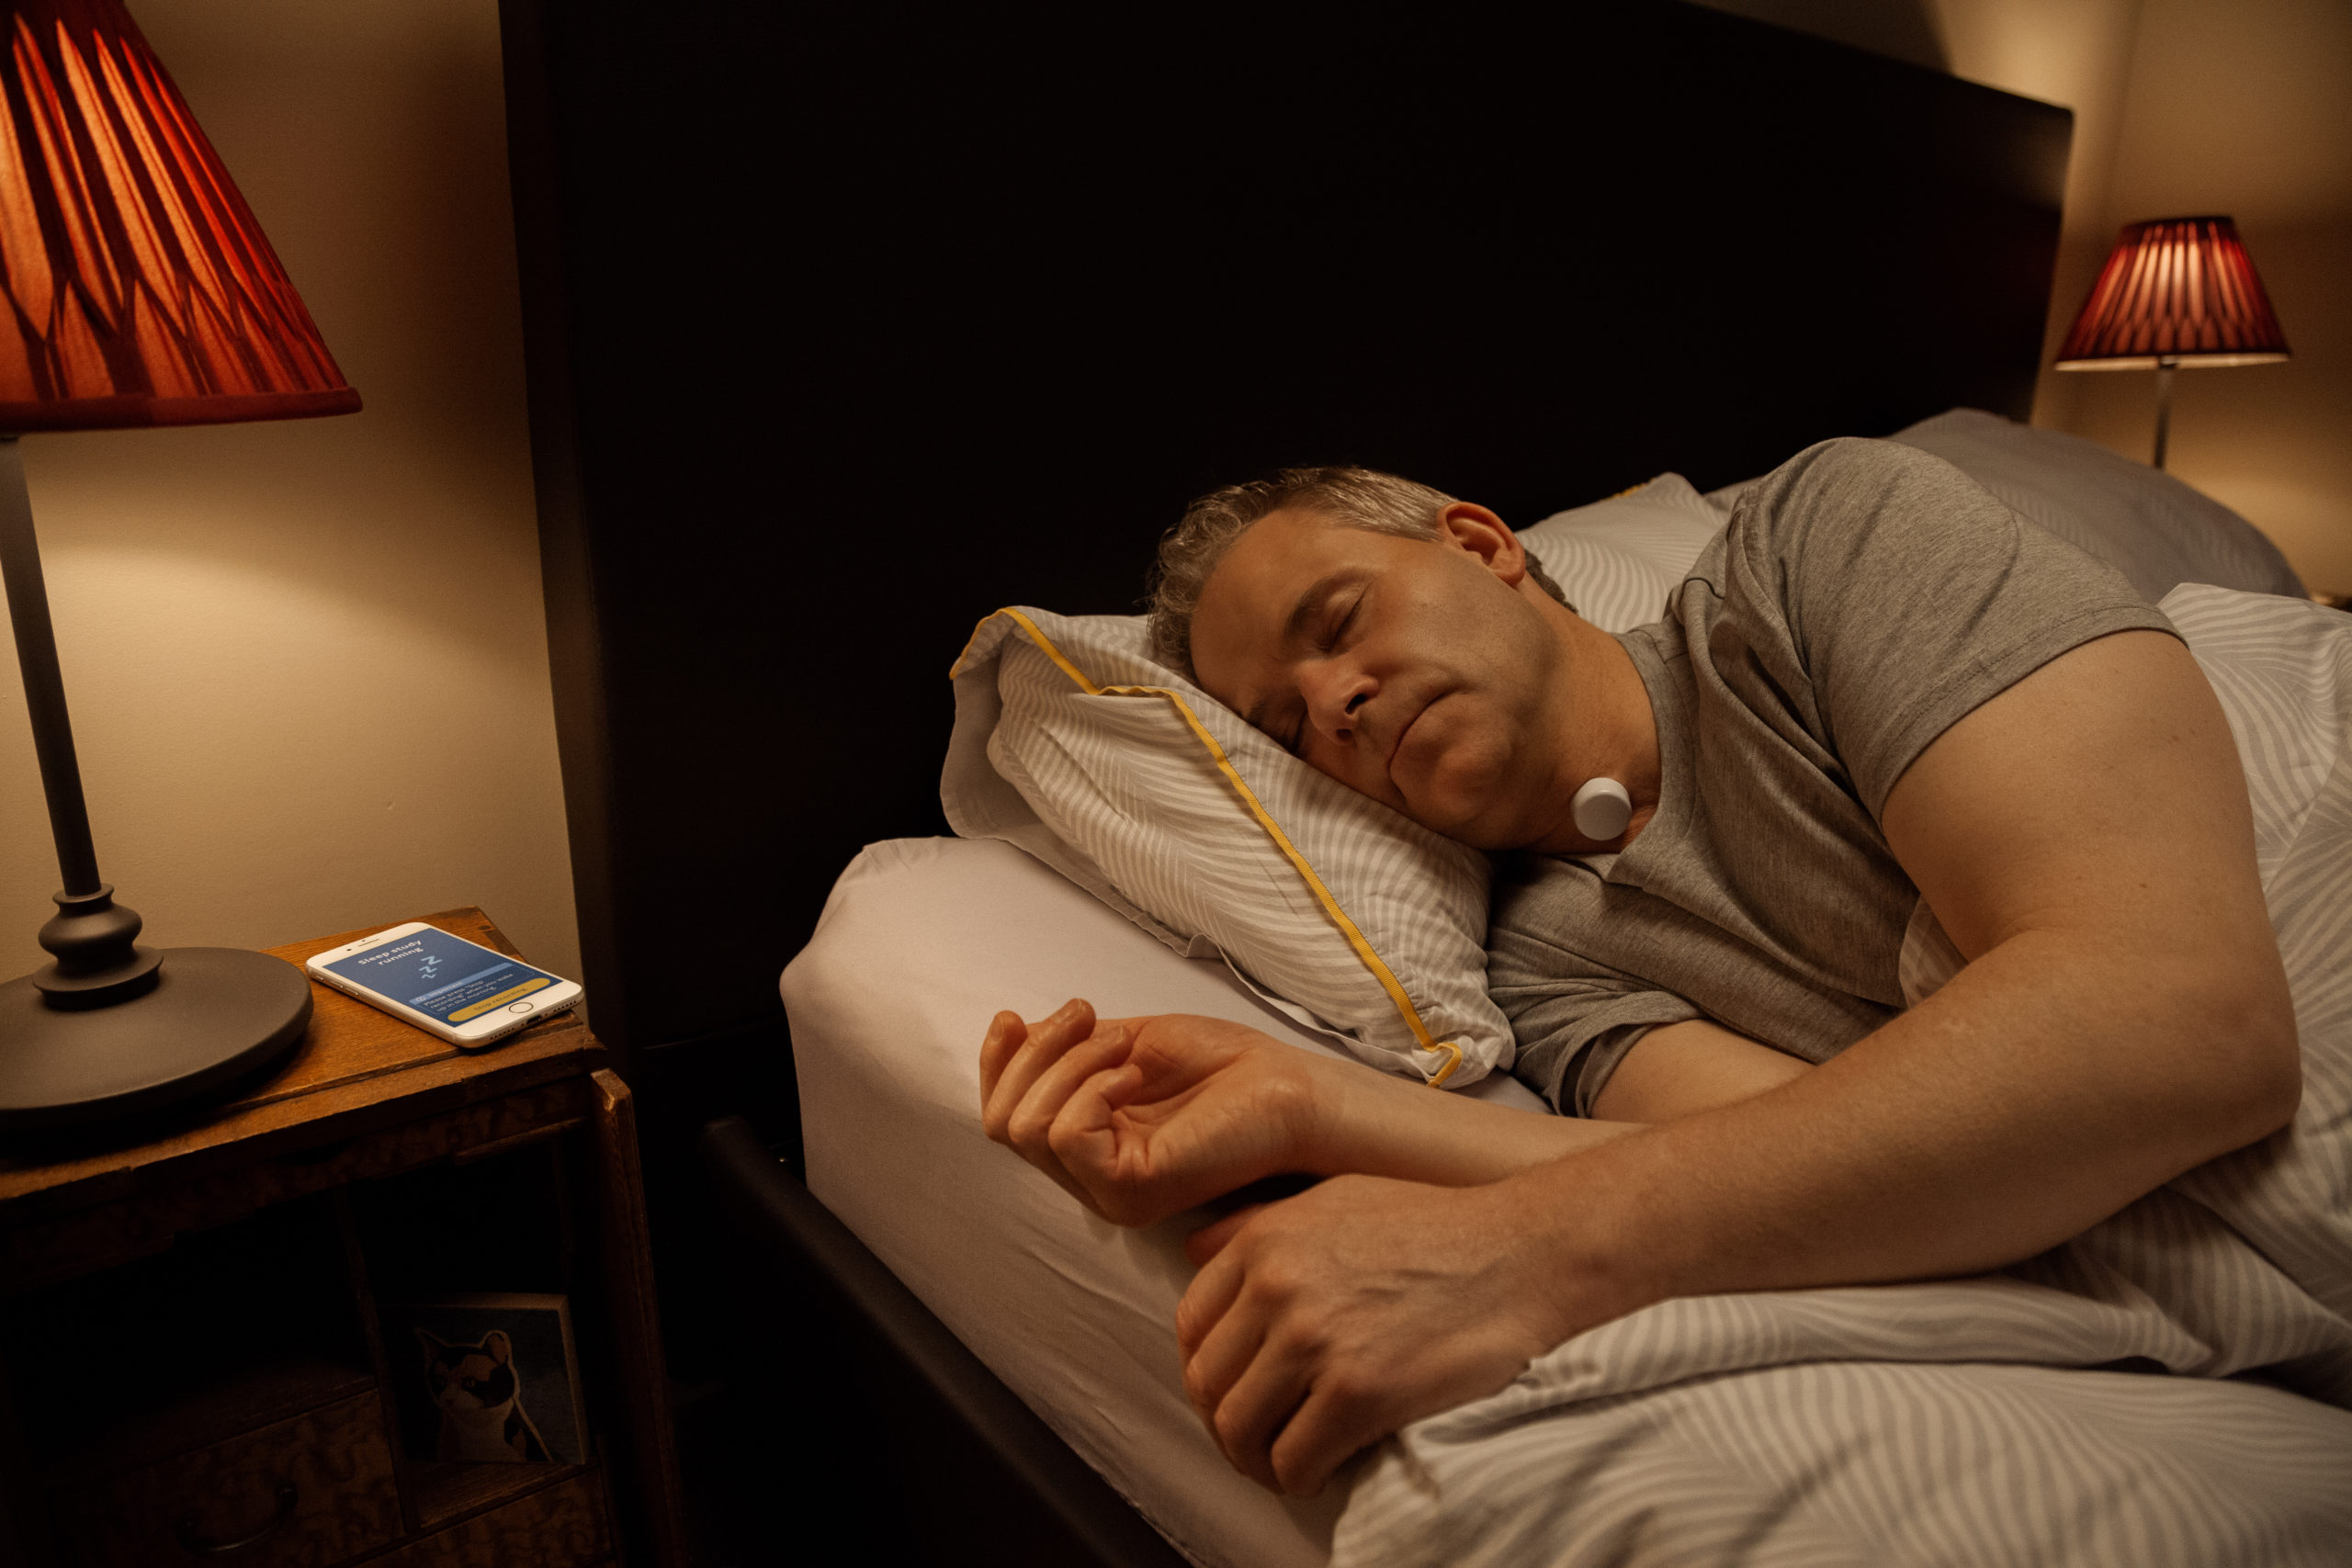 NHS-backed Acurable to launch sleep apnoea testing device in the US